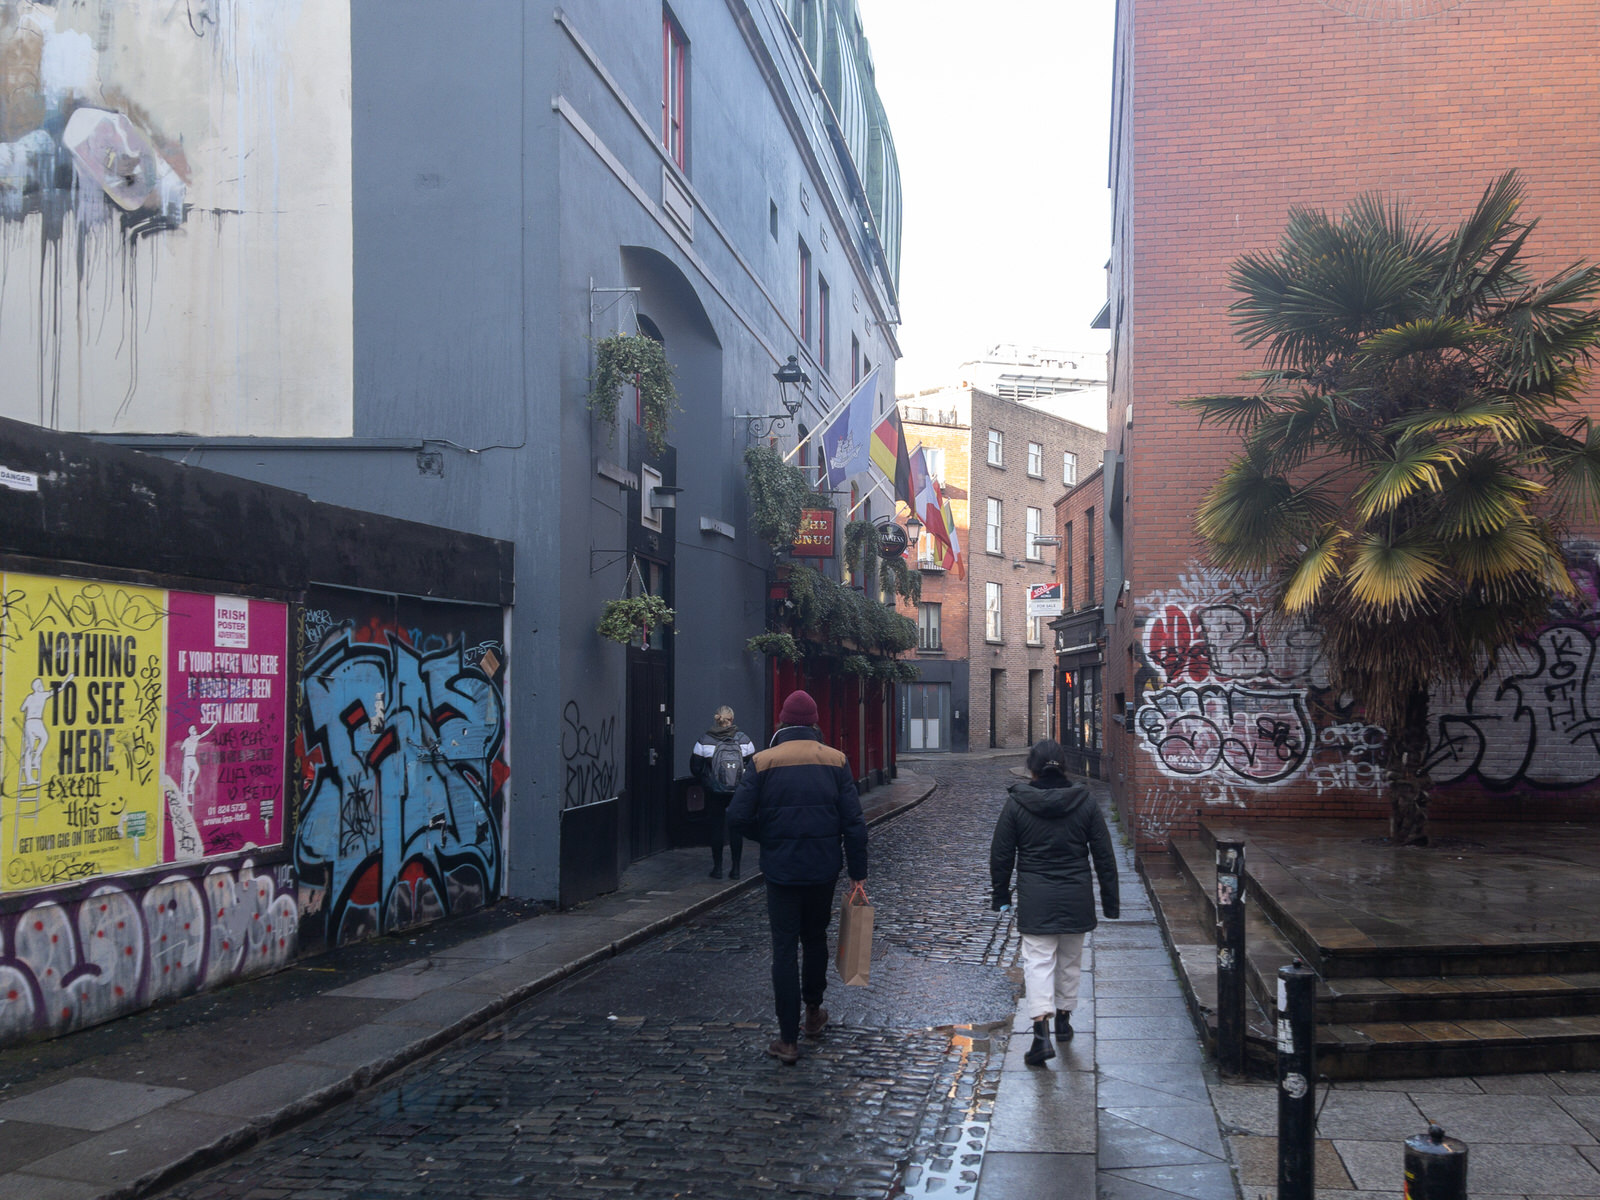 TEMPLE BAR AREA MAY BE RETURNING TO NORMAL